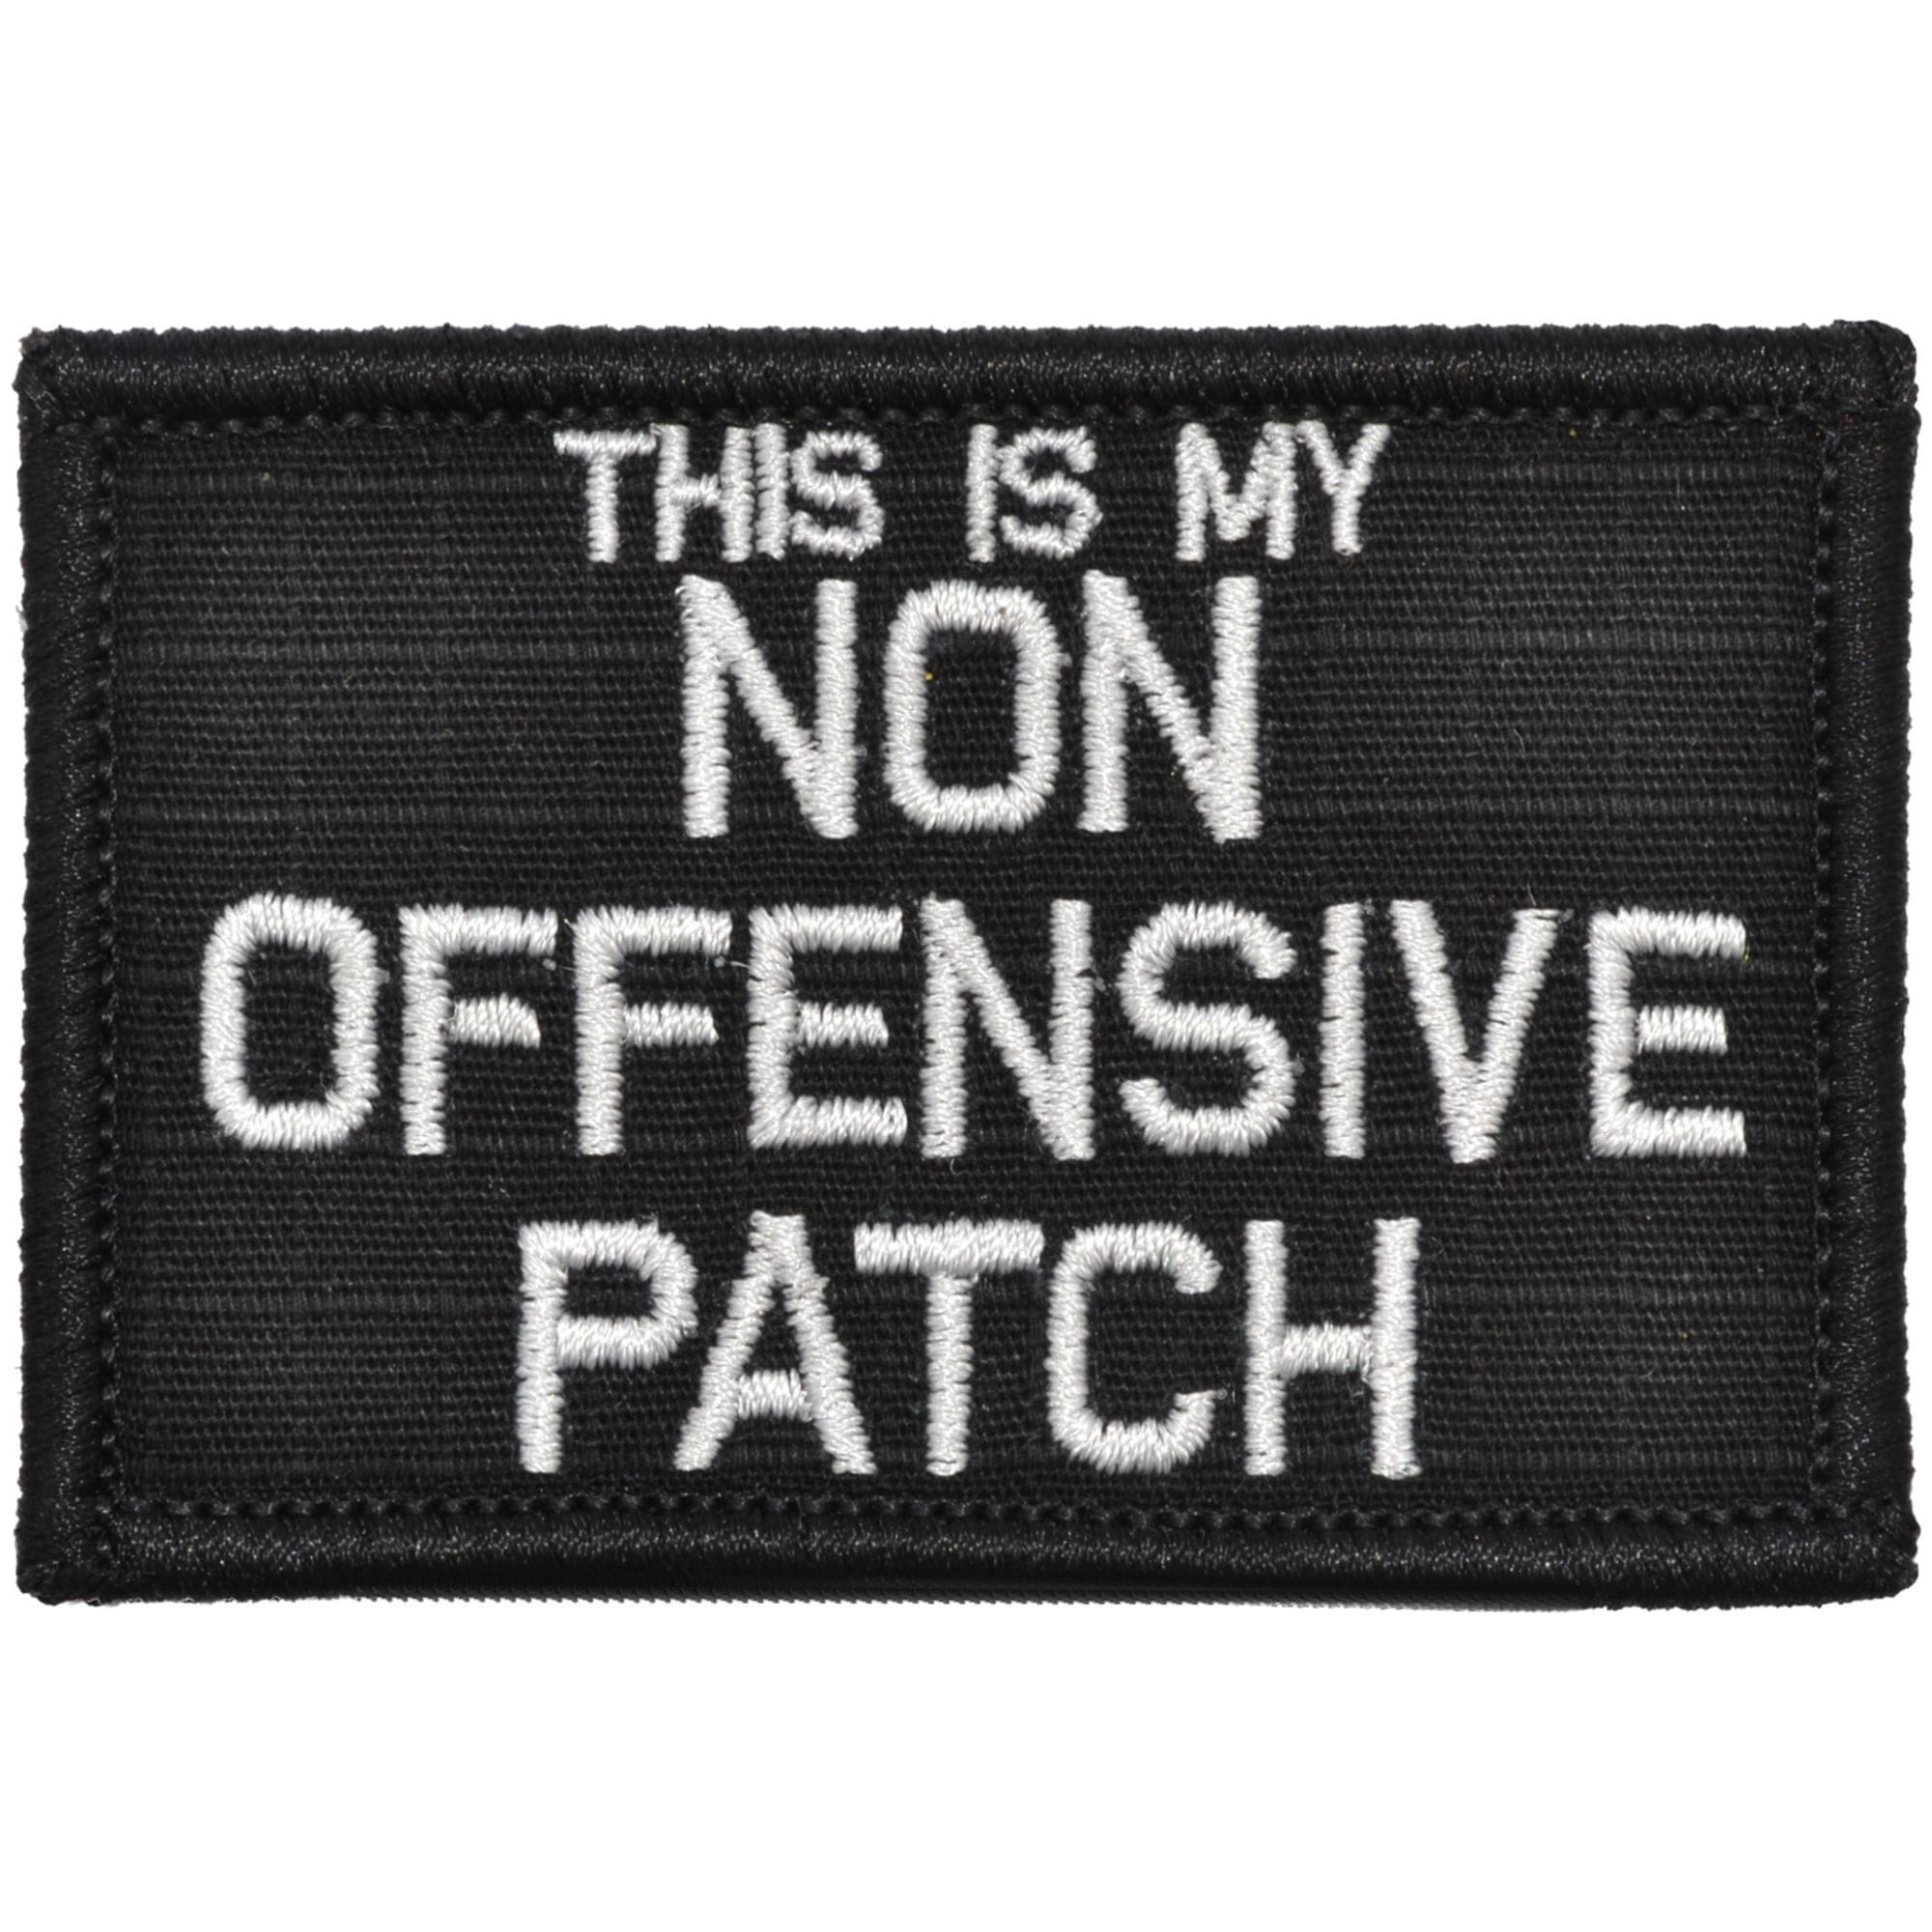 Tactical Gear Junkie Patches Black This Is My Non Offensive Patch - 2x3 Patch